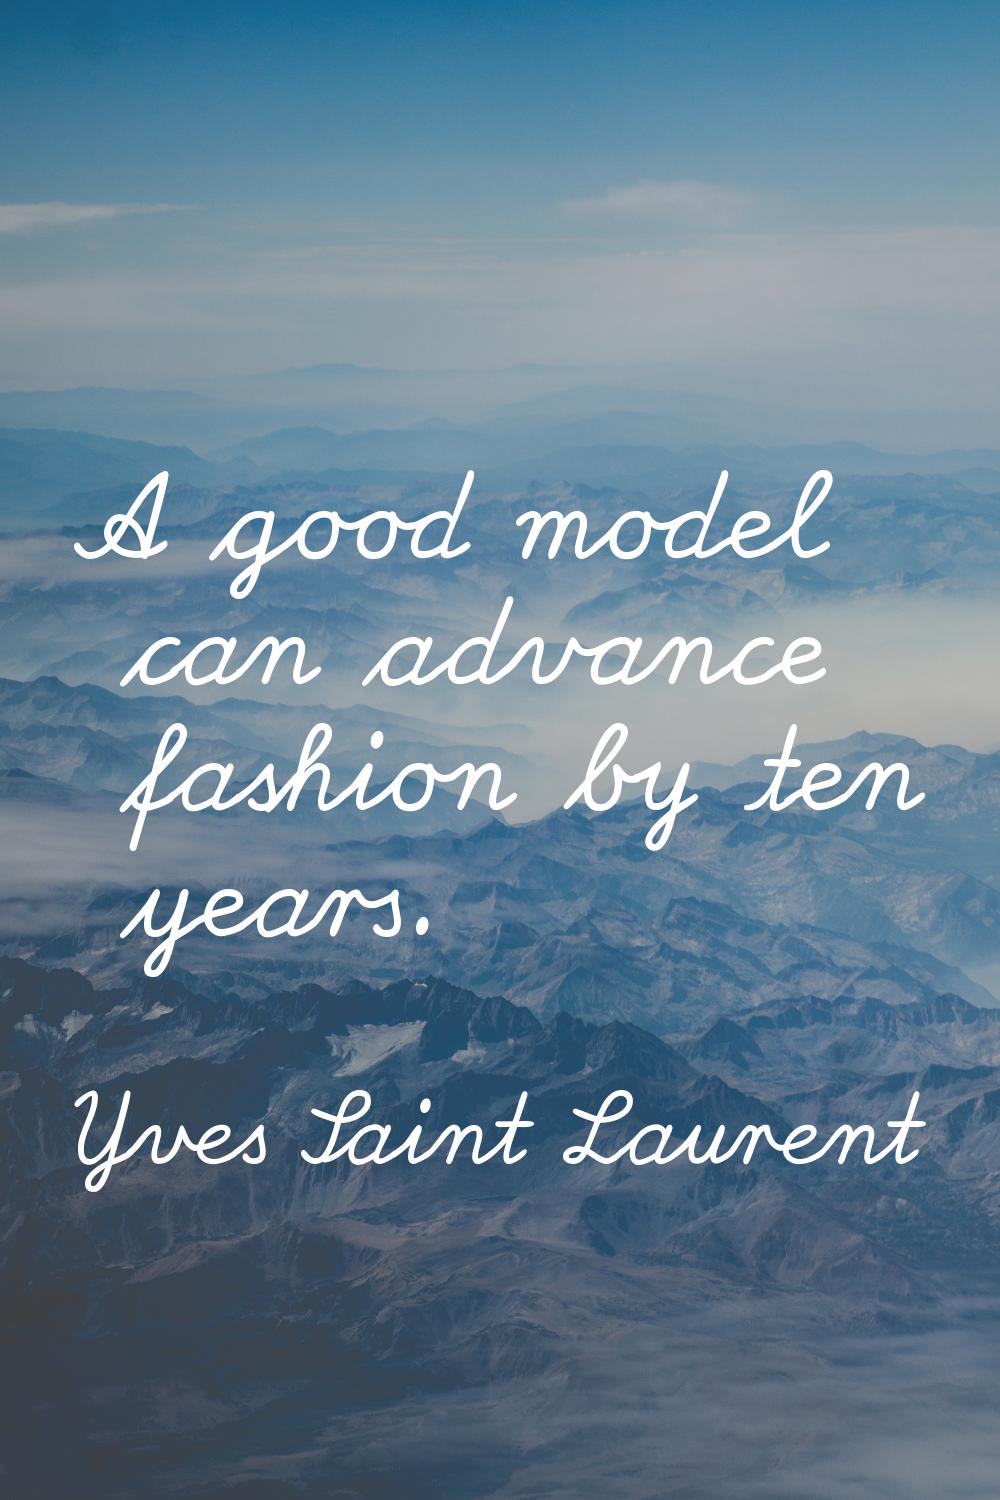 A good model can advance fashion by ten years.